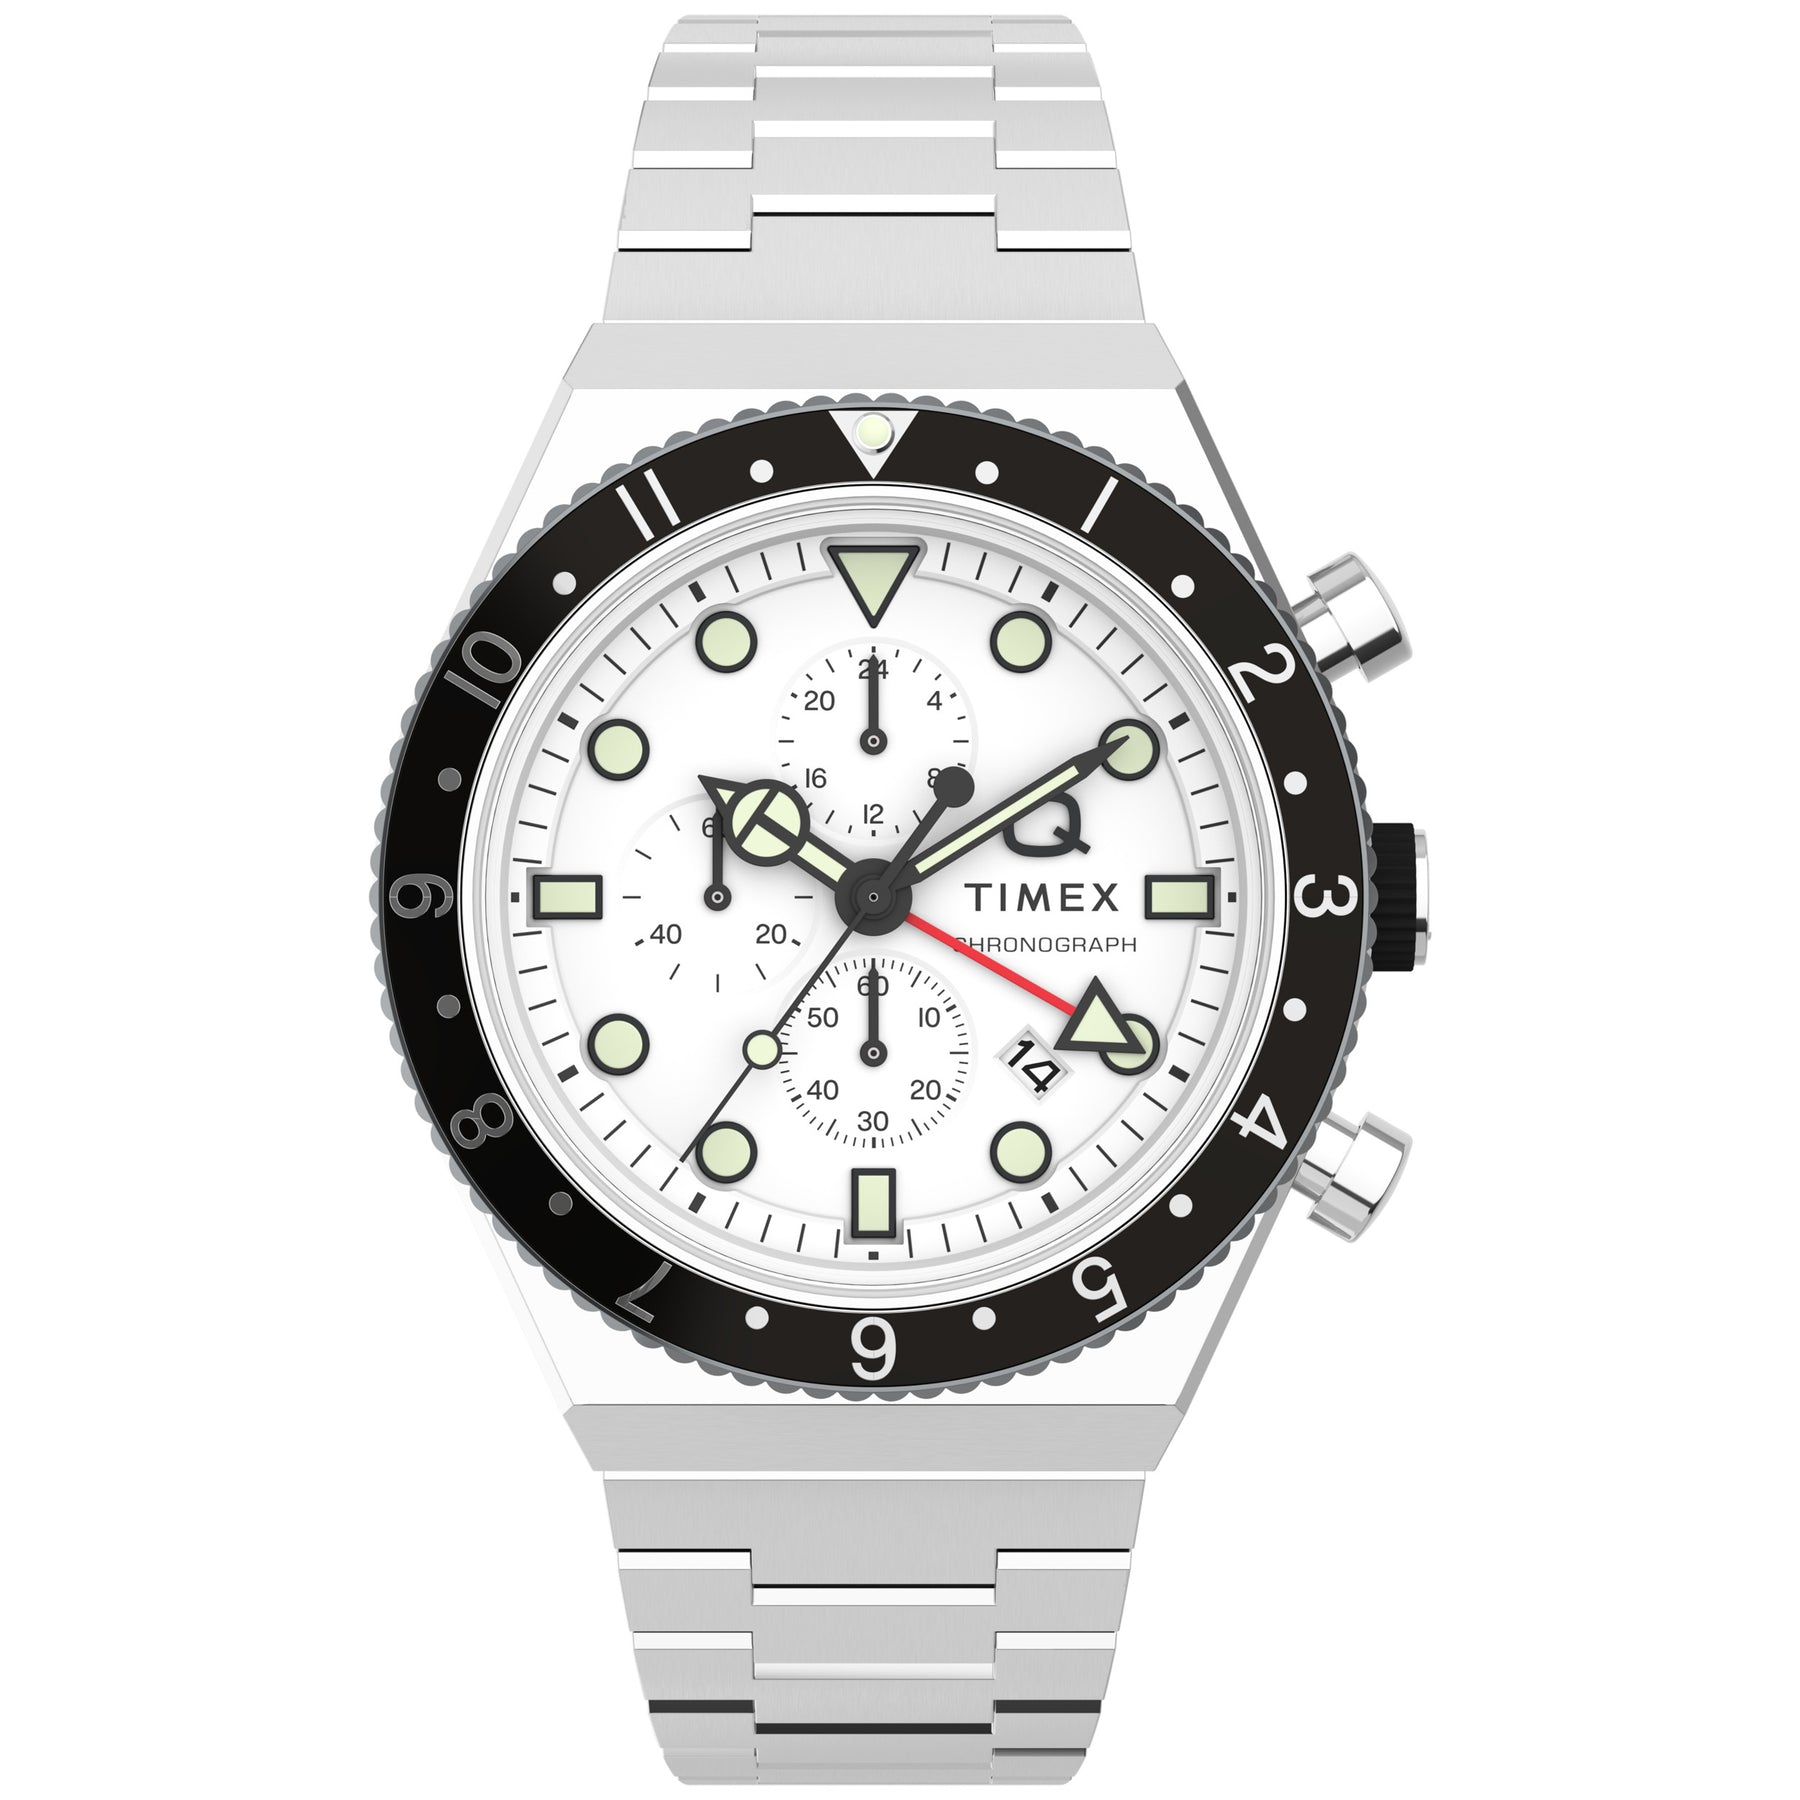 Timex Q GMT Chronograph 40mm White SS | Watches.com